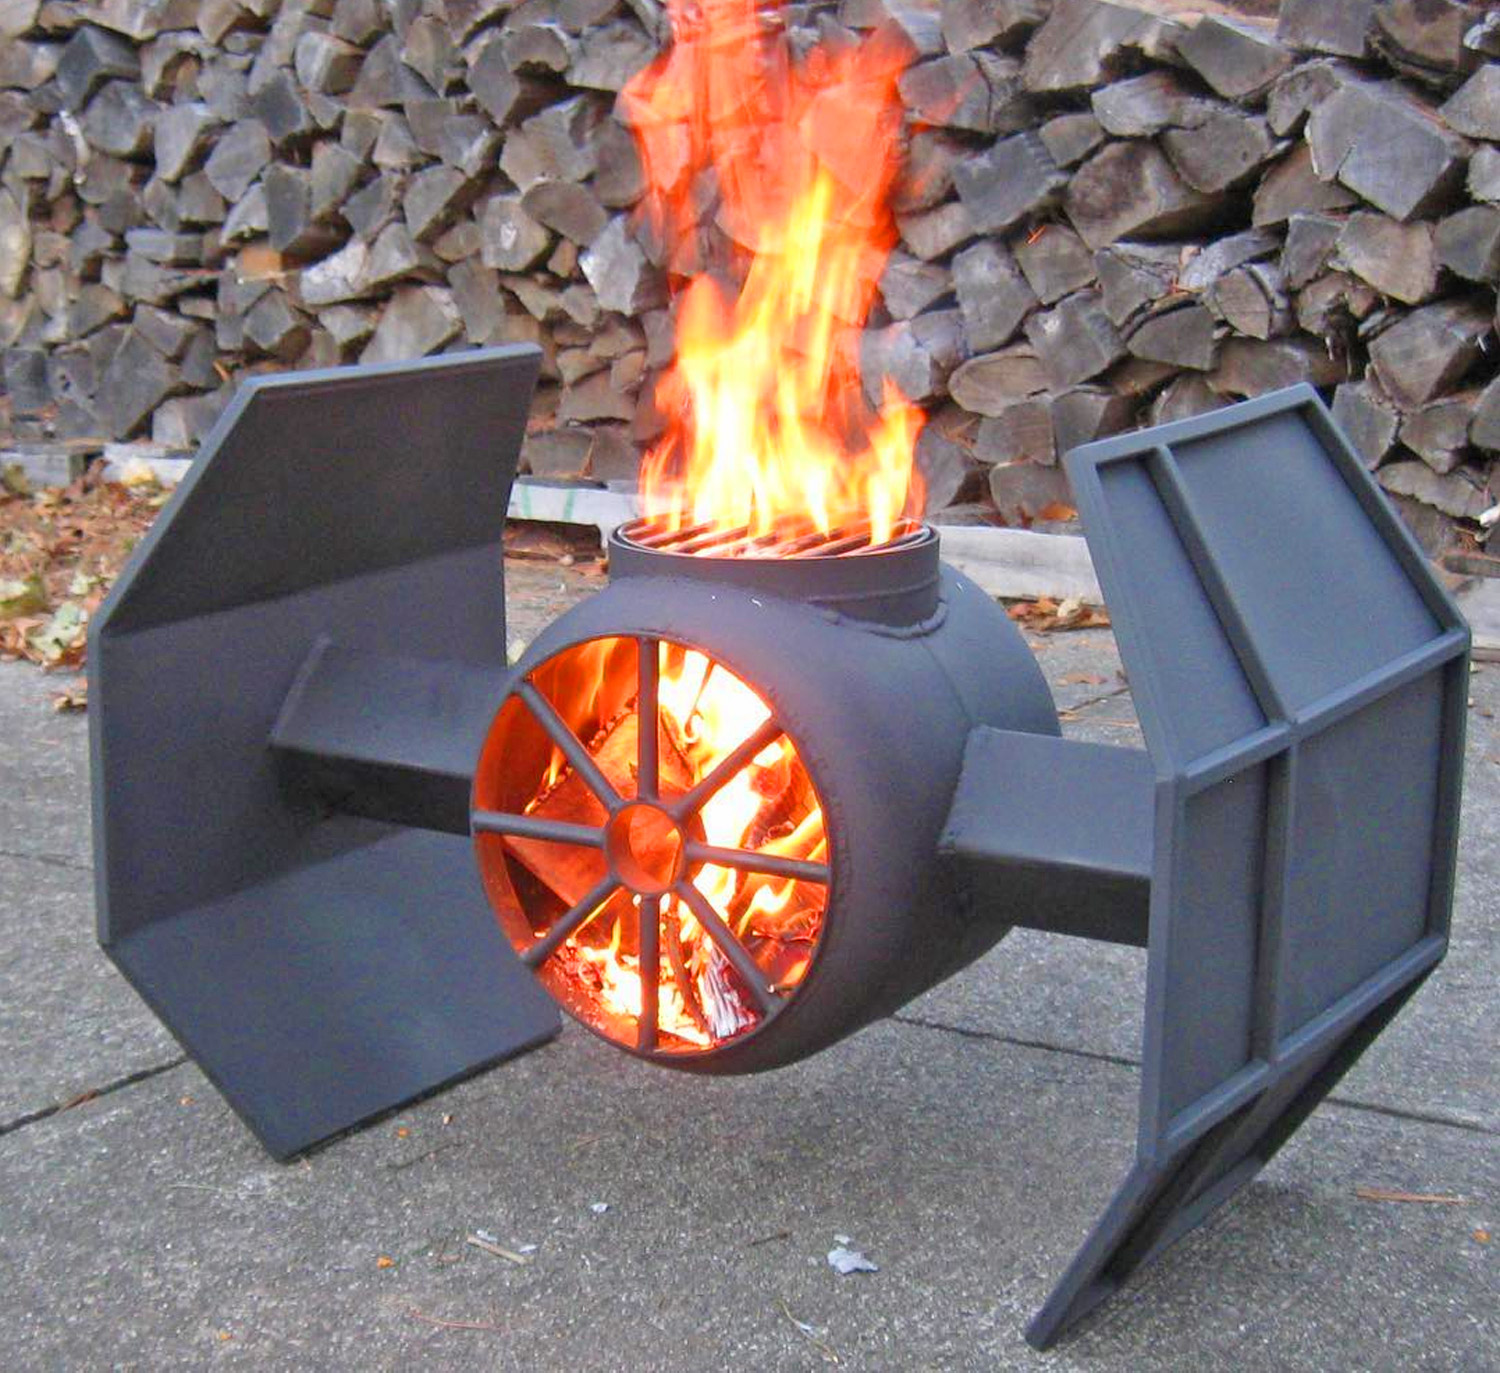 Star Wars Tie Fighter Fire Pits, Stormtrooper Fire Pit